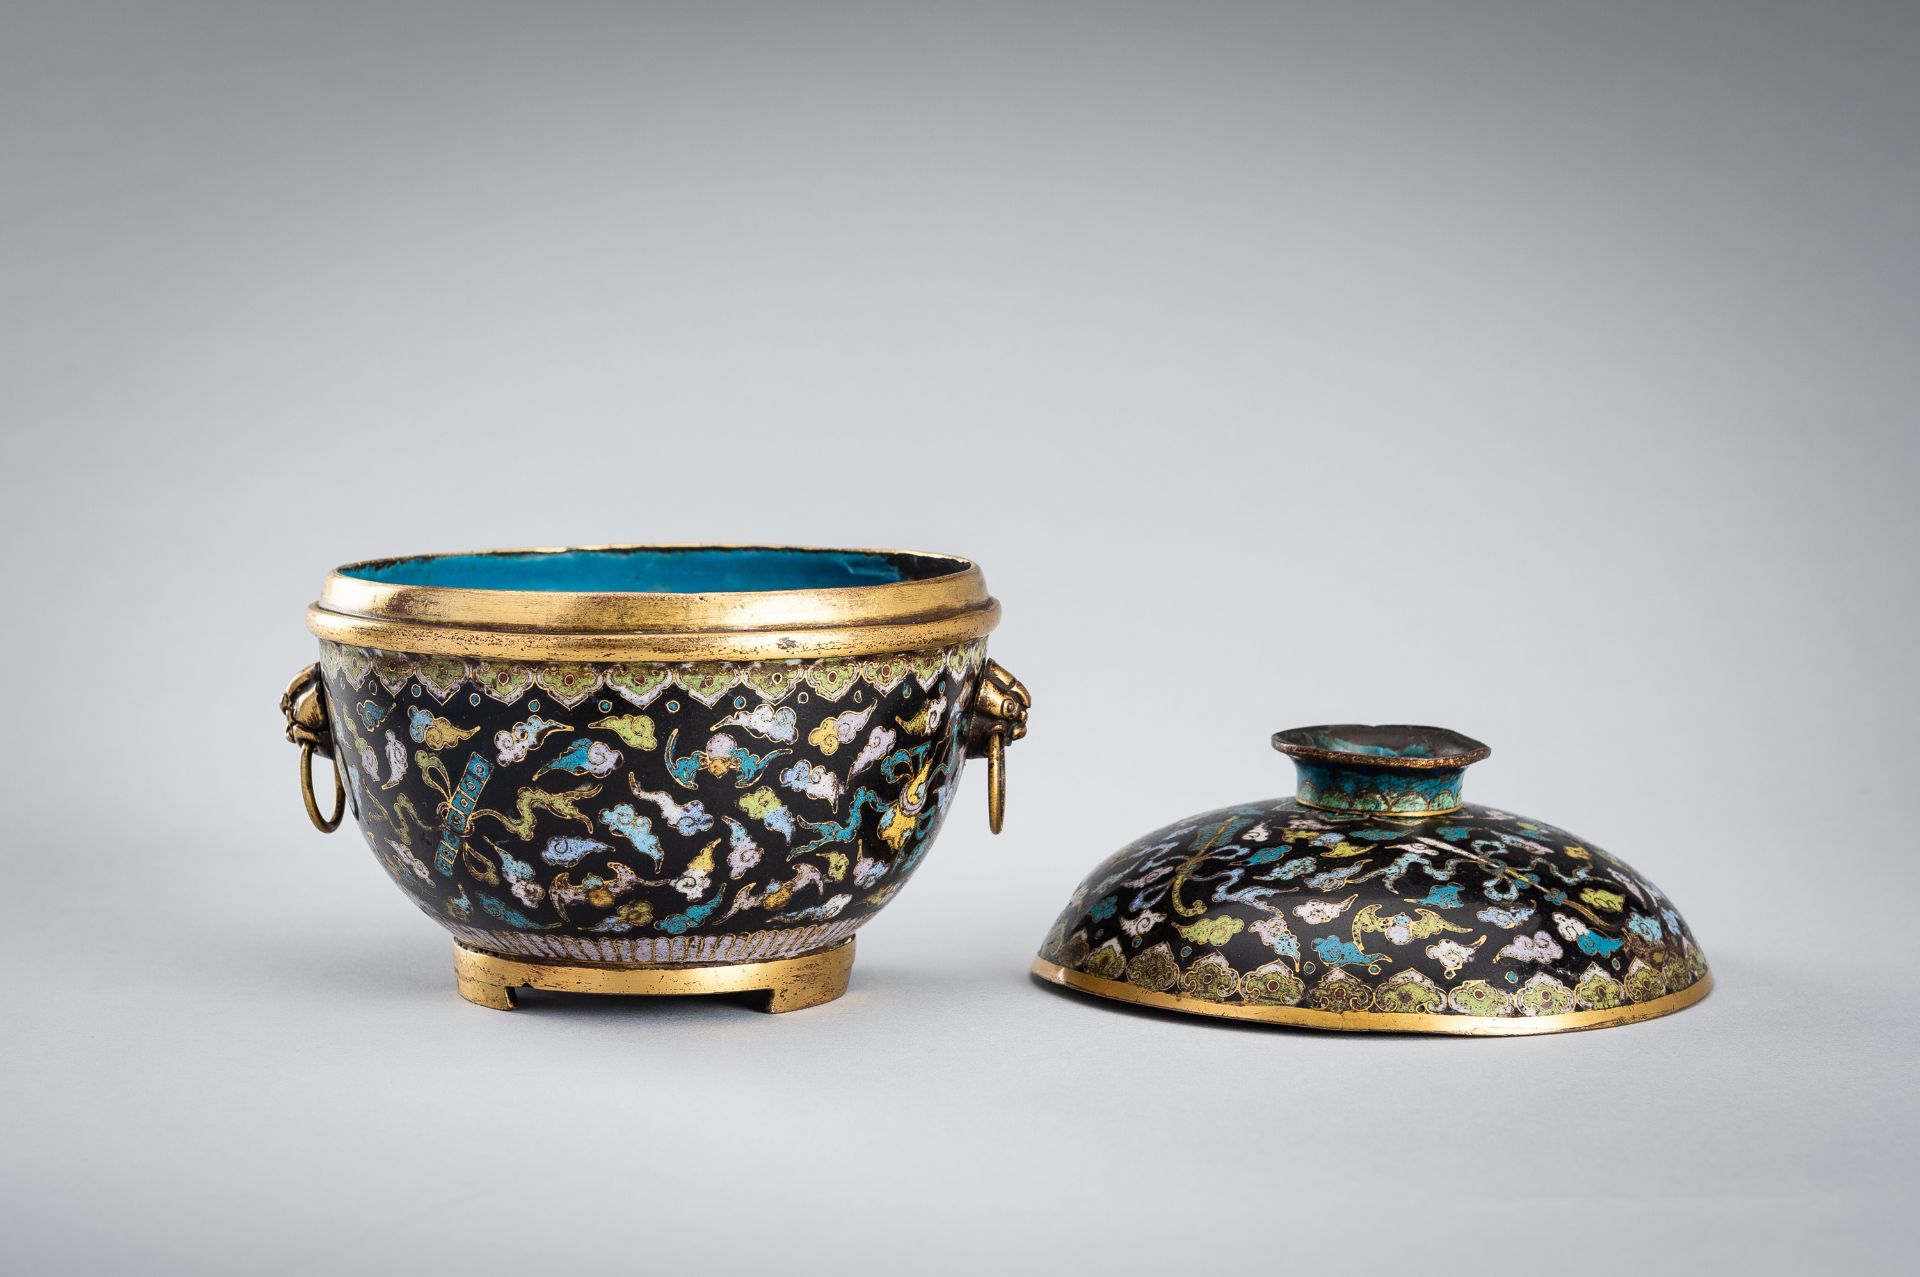 A CLOISONNE ENAMEL 'EIGHT DAOIST EMBLEMS' JAR AND COVER, QING DYNASTY - Image 10 of 14